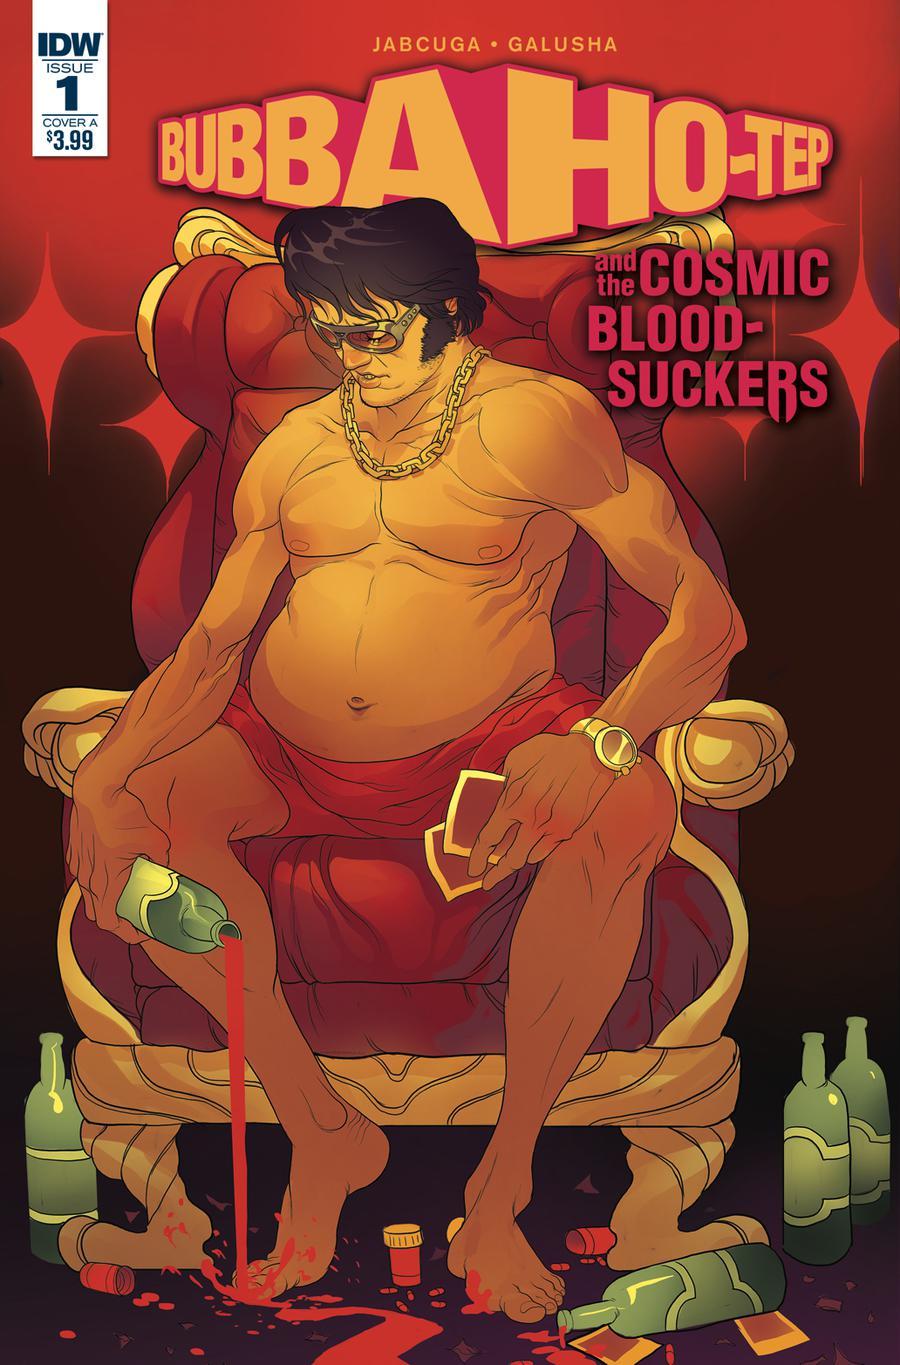 Bubba Ho-Tep And The Cosmic Blood-Suckers Vol. 1 #1